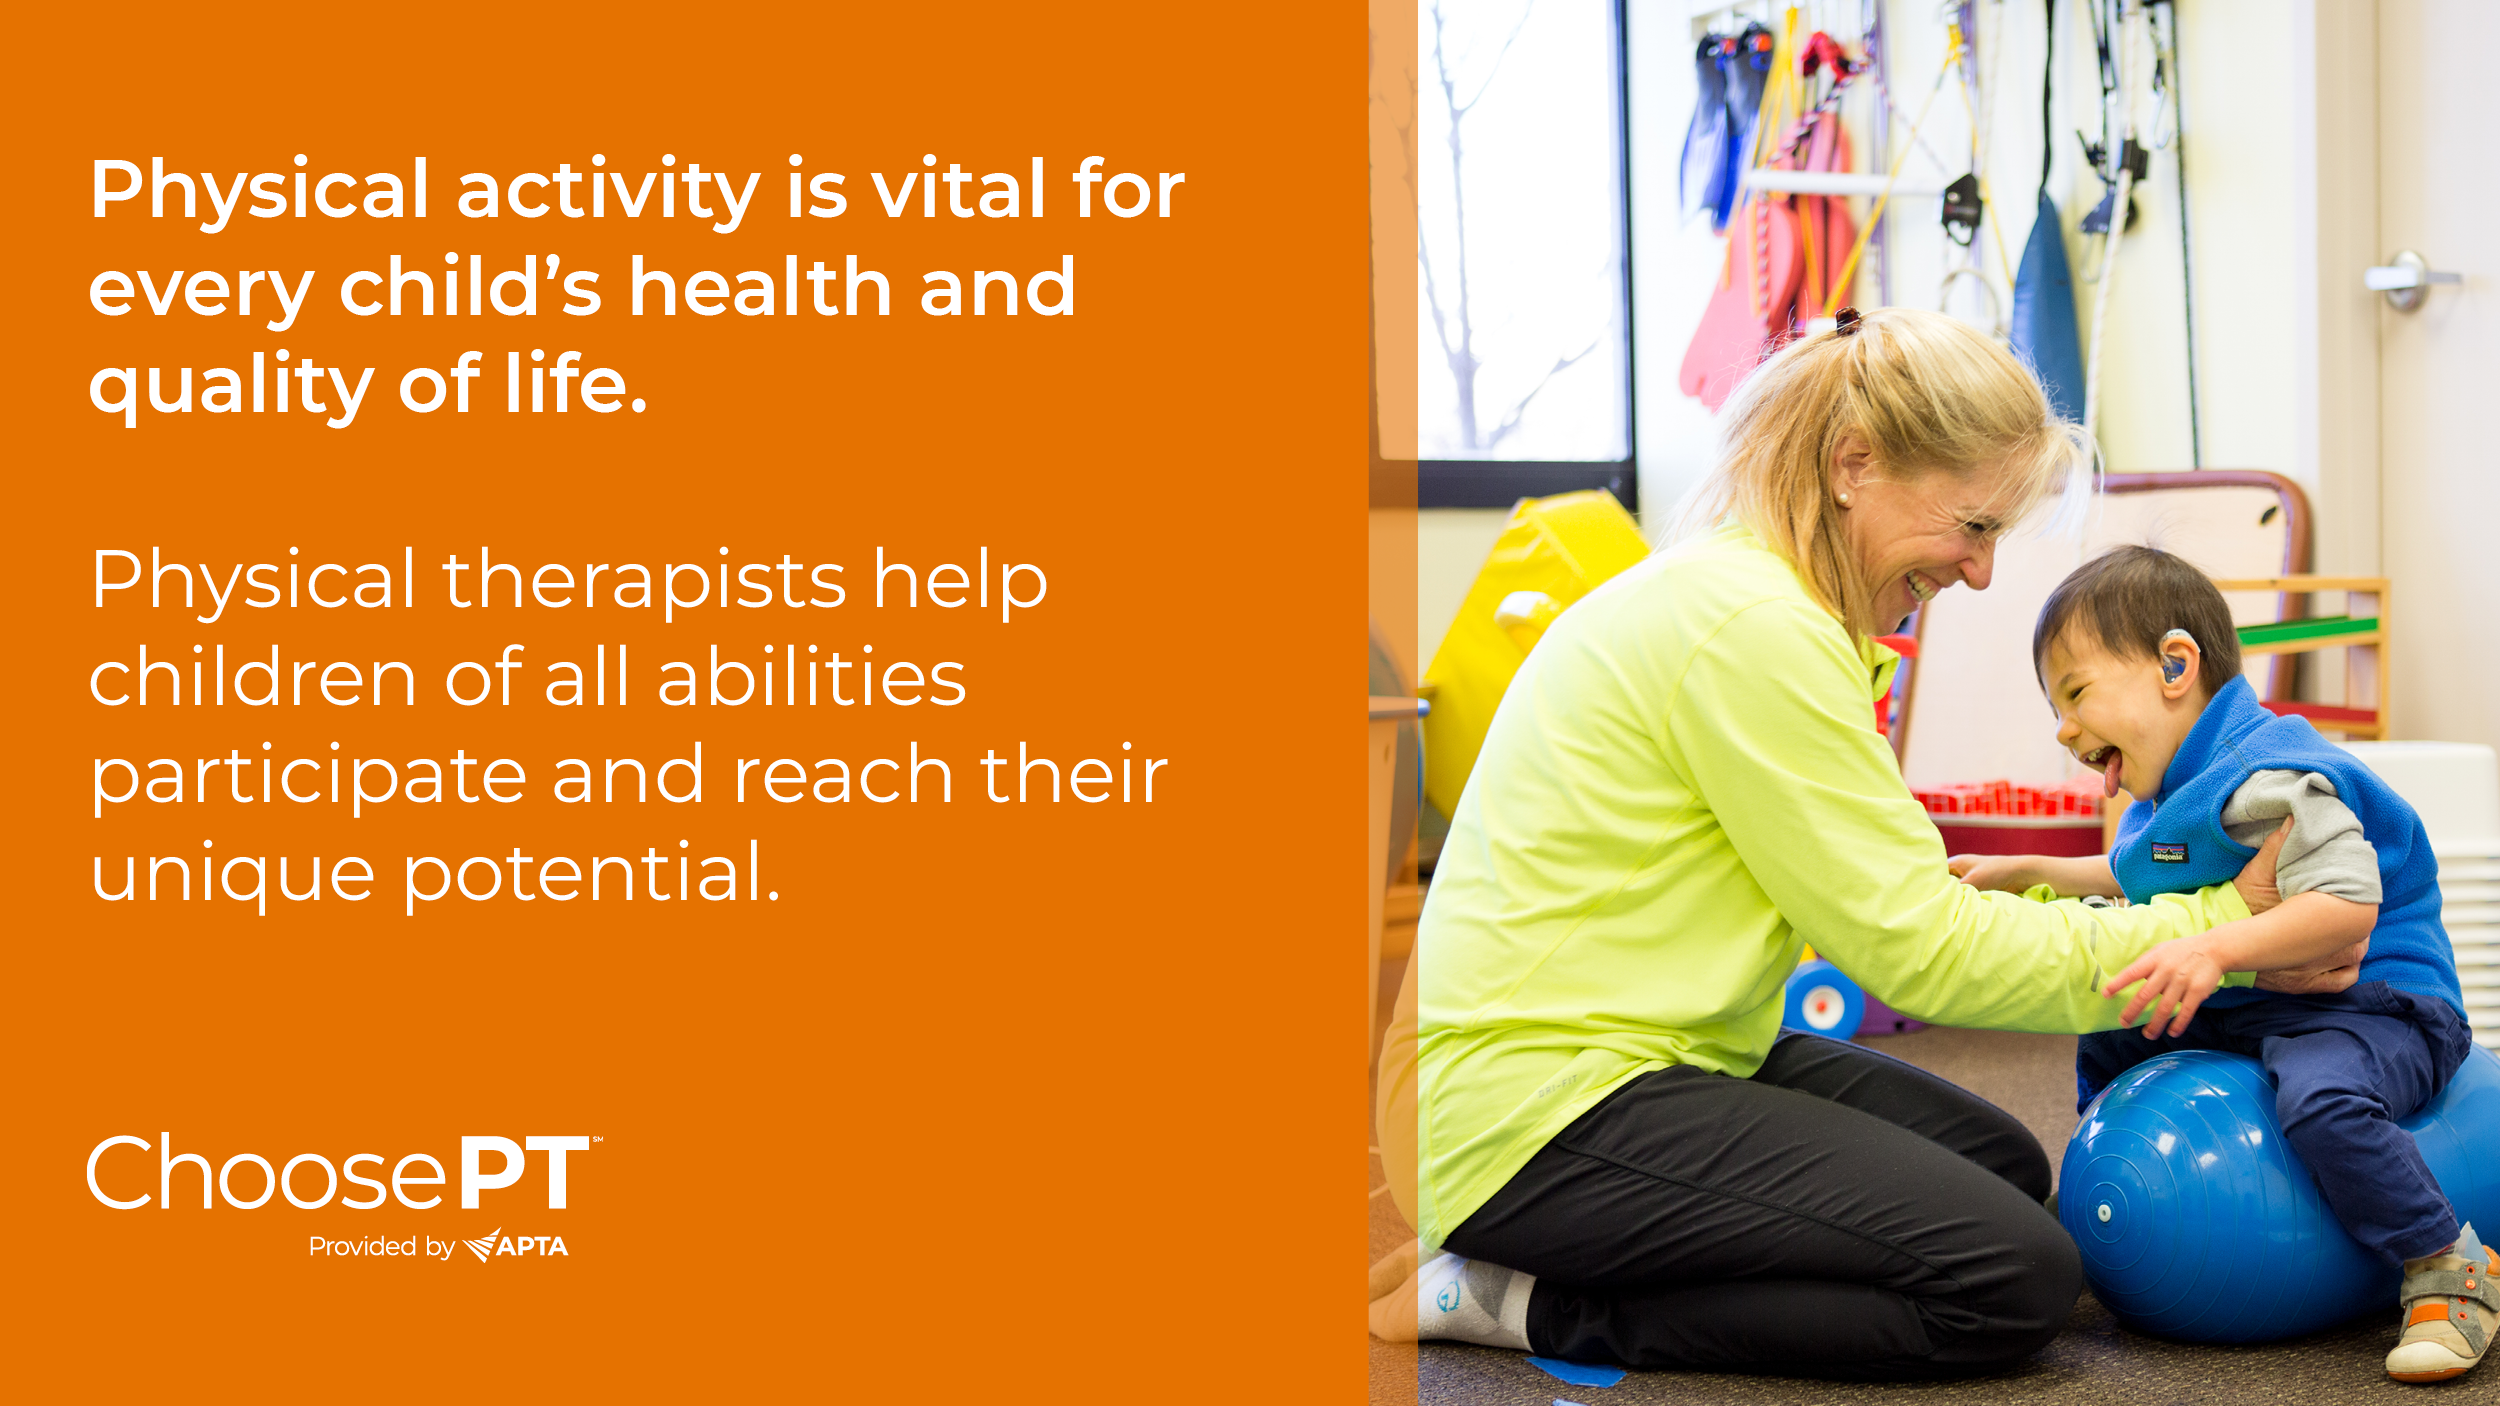 White text on an orange background reads: "Physical activity is vital for every child's health and quality of life. Physical therapists help children of all abilities participate and reach their unique potential" with the ChoosePT logo in the bottom left corner. This text is alongside an image of a young child smiling while held in sitting on a blue peanut ball by a PT.